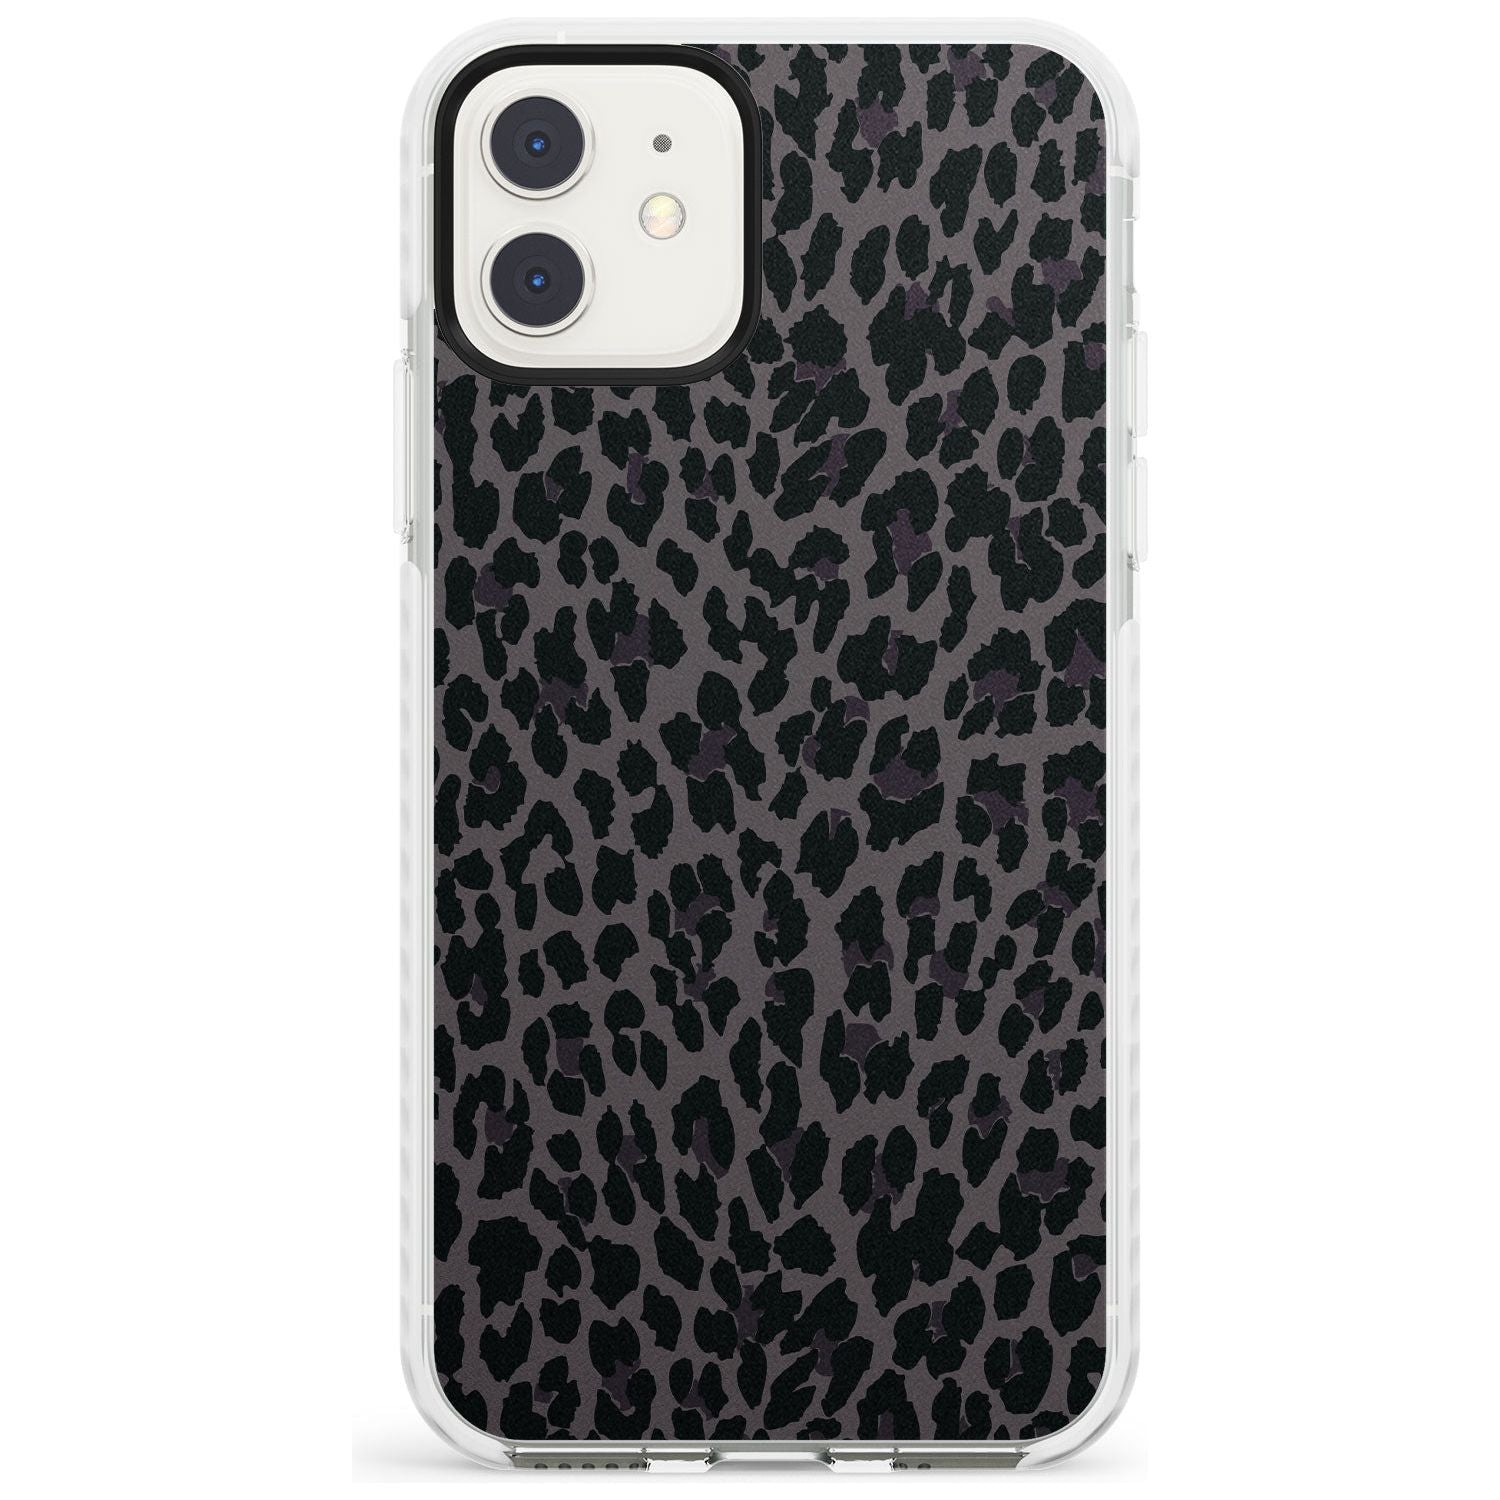 Dark Animal Print Pattern Small Leopard Impact Phone Case for iPhone 11